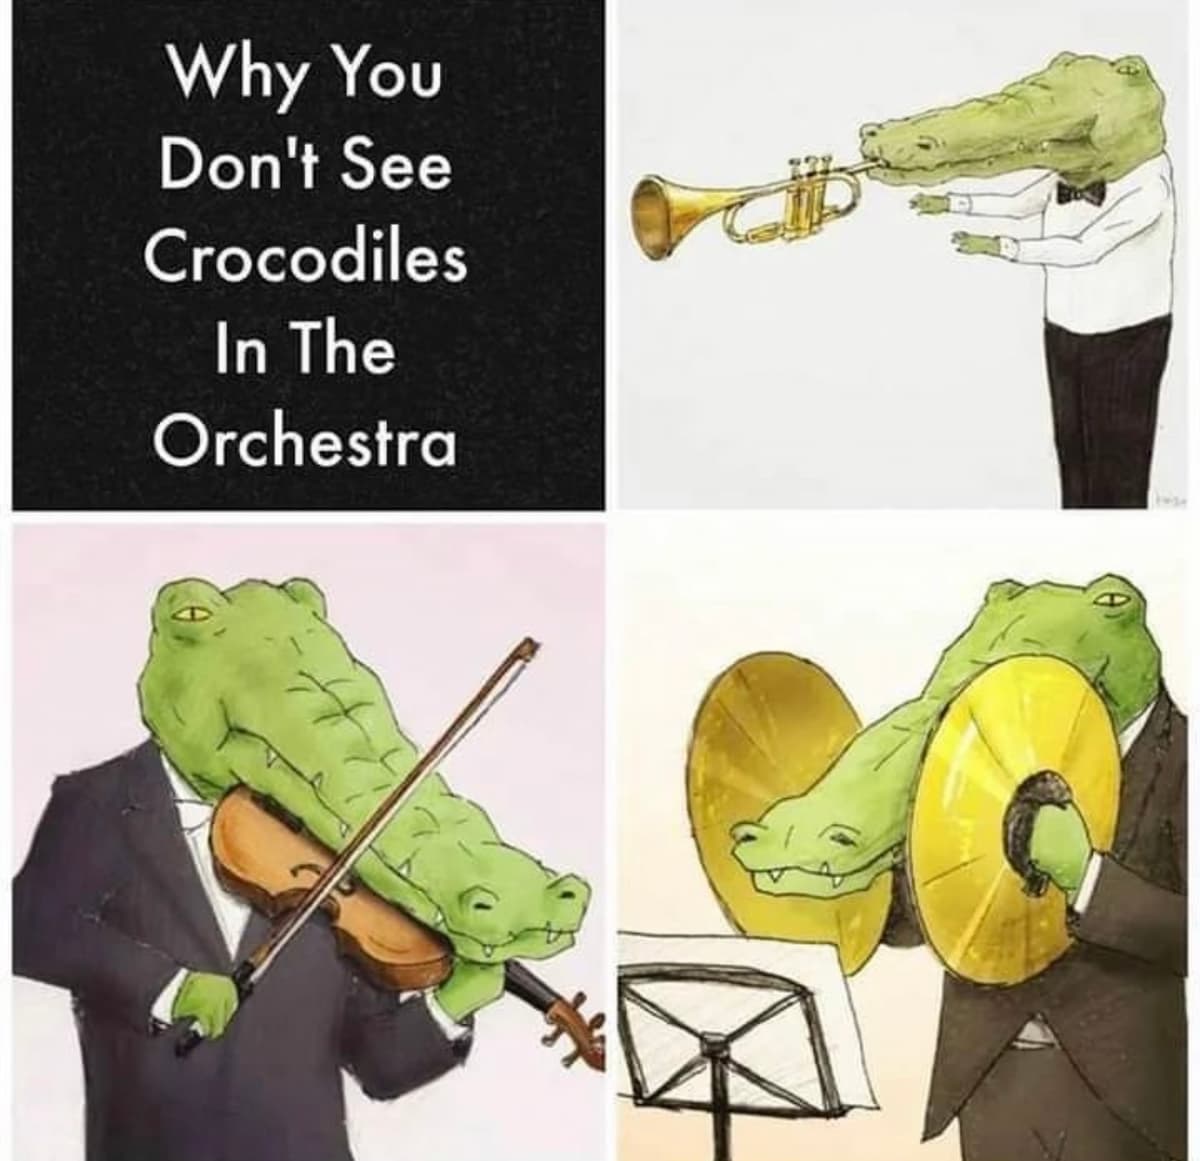 Why you don't see crocodiles in the orchestra